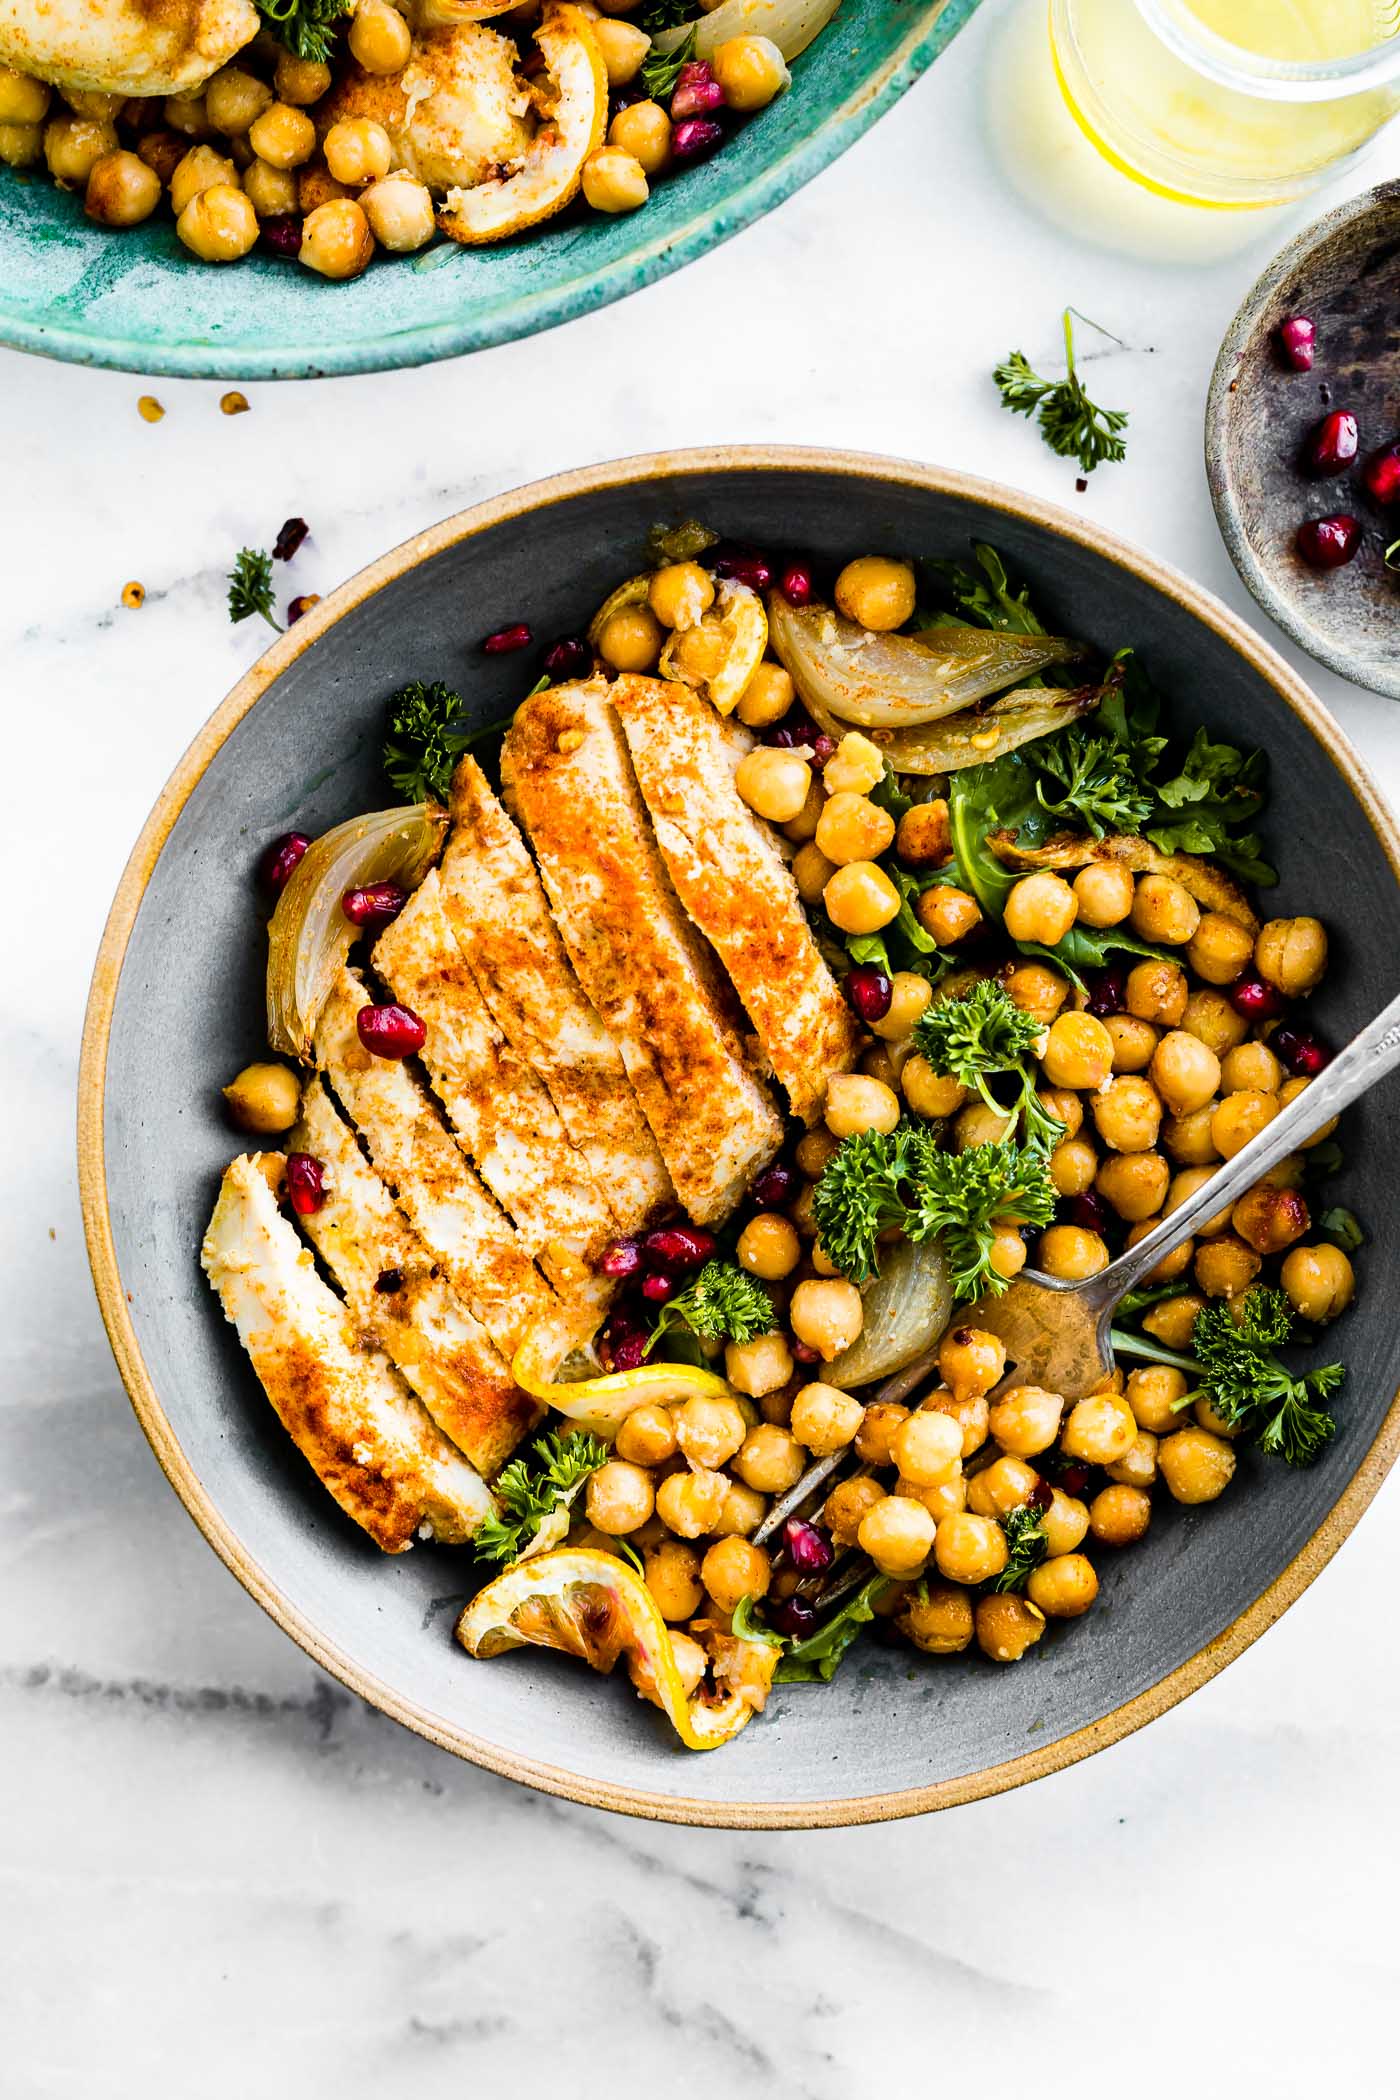 This cumin roasted chickpea chicken bowls recipe has citrus and honey marinated chicken and chickpeas. A quick, delicious, easy baked chicken dinner recipe.